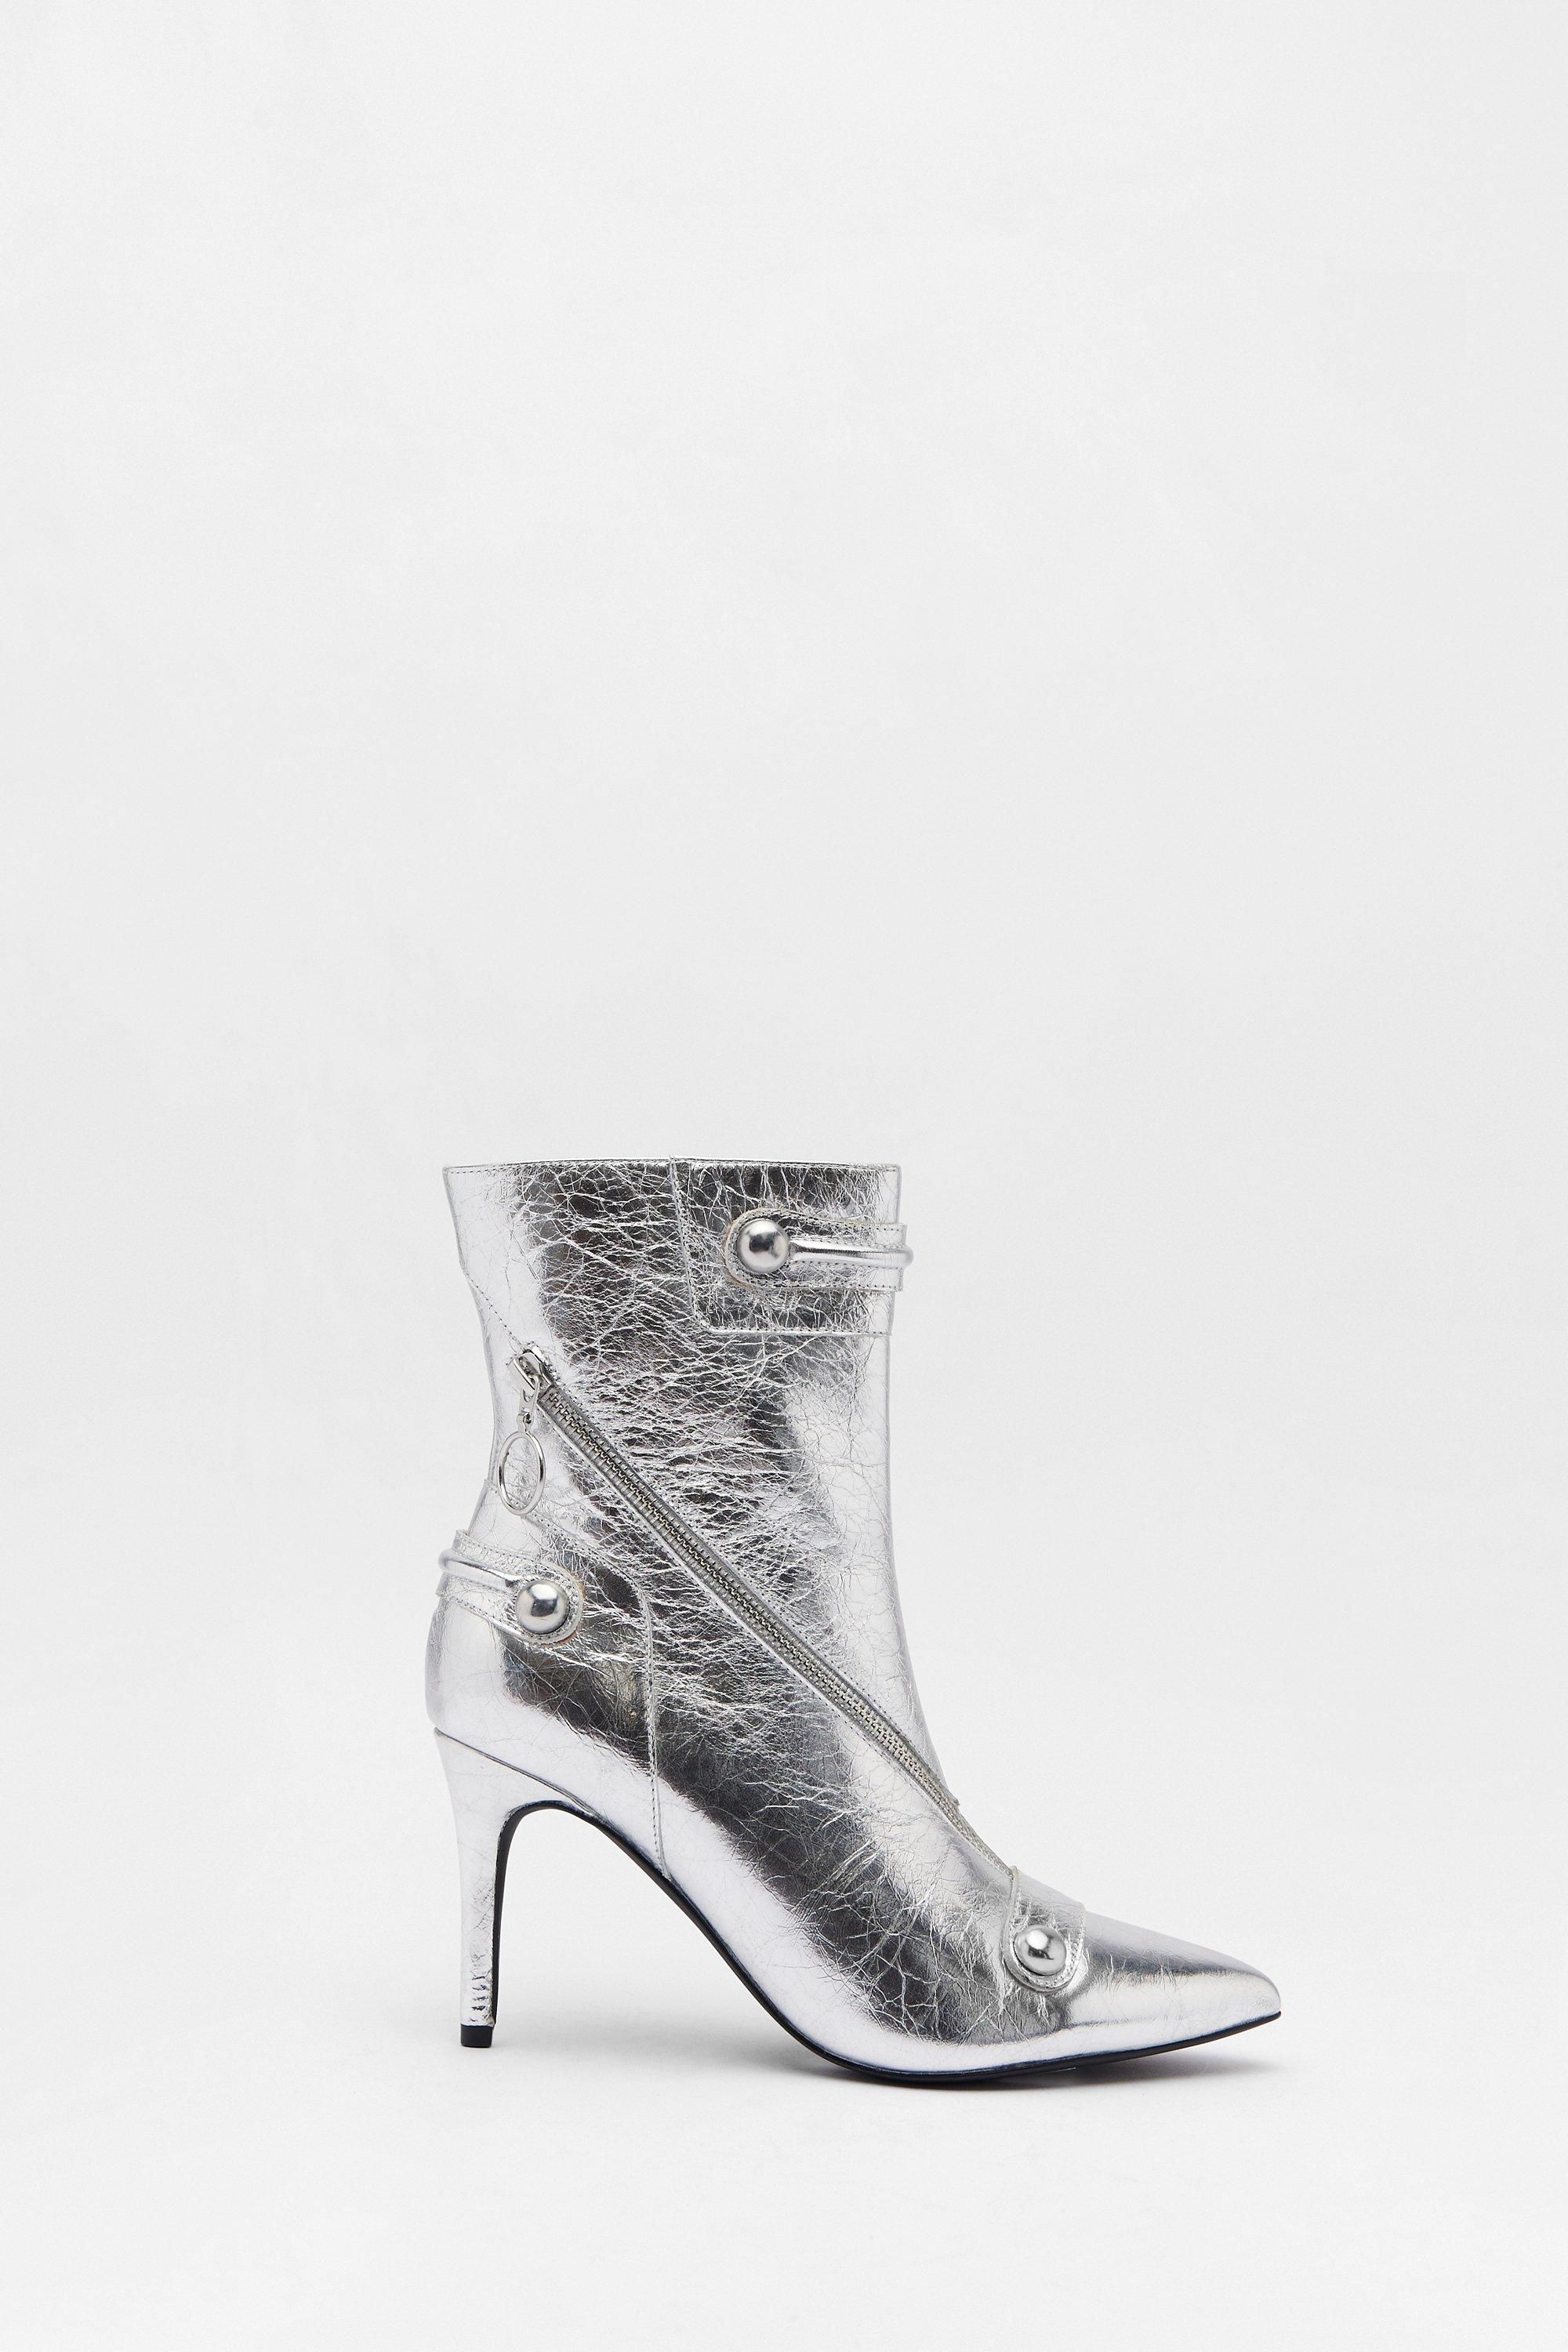 Boots | Leather Metallic Zip & Stud Pointed Toe Ankle Boots | Warehouse | Warehouse UK & IE